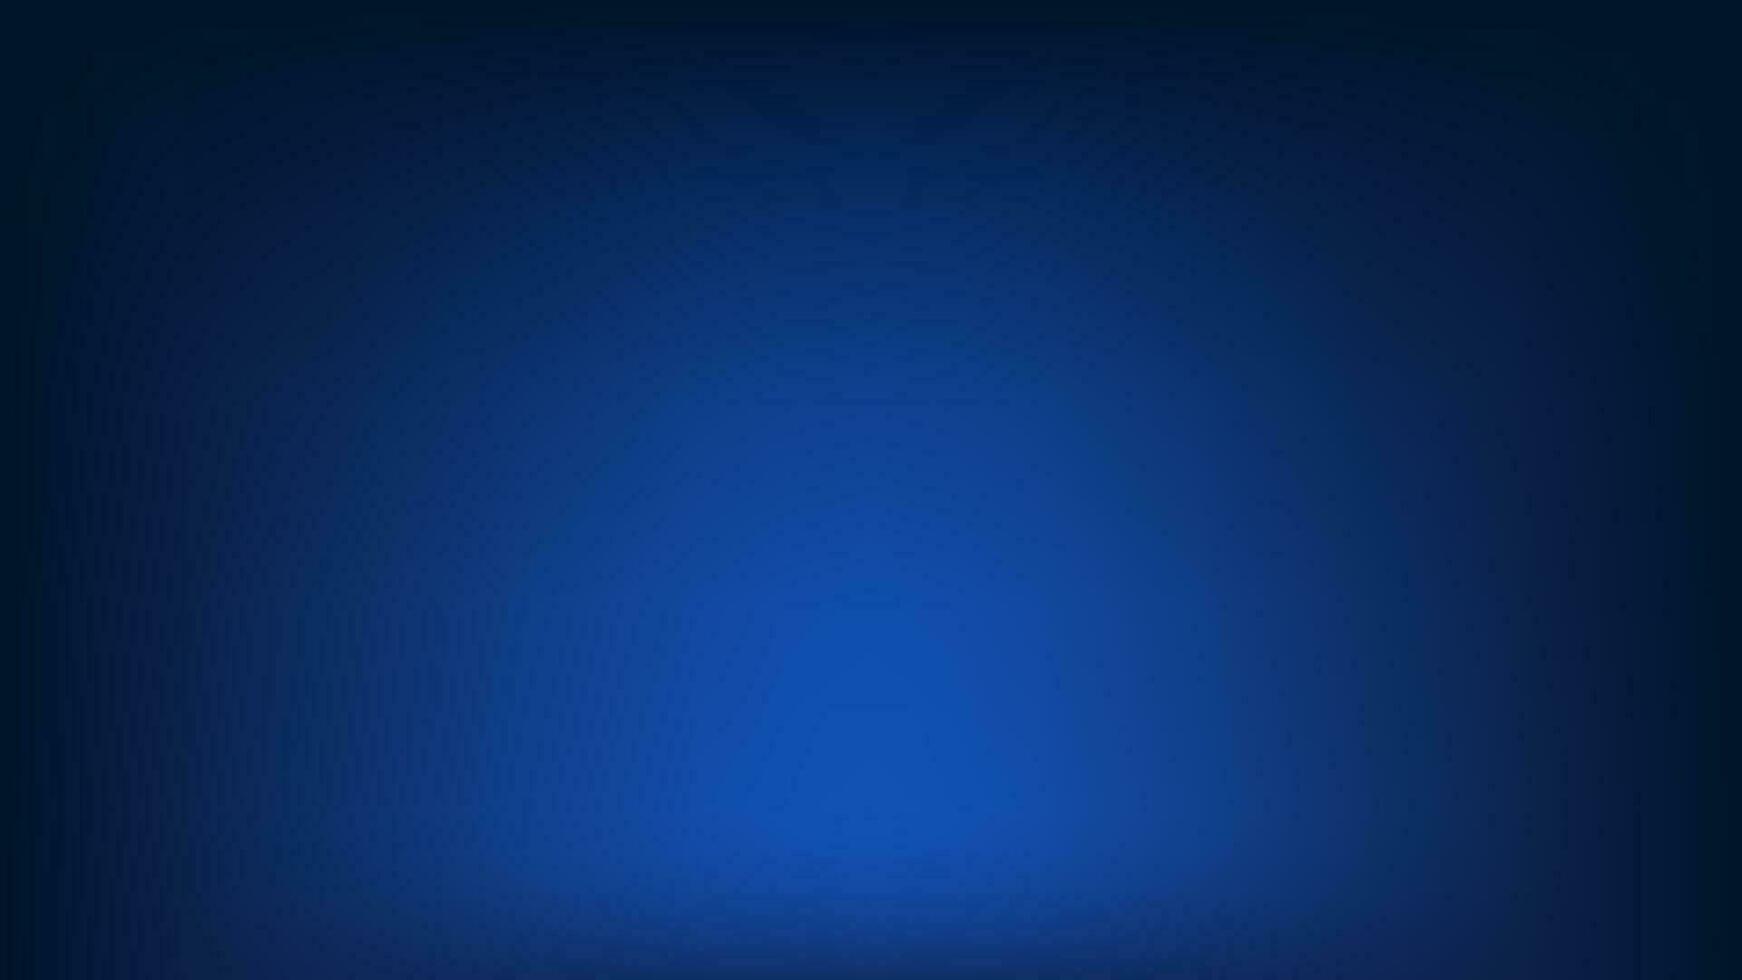 Blue gradient background. simple deep sea abstract background vector